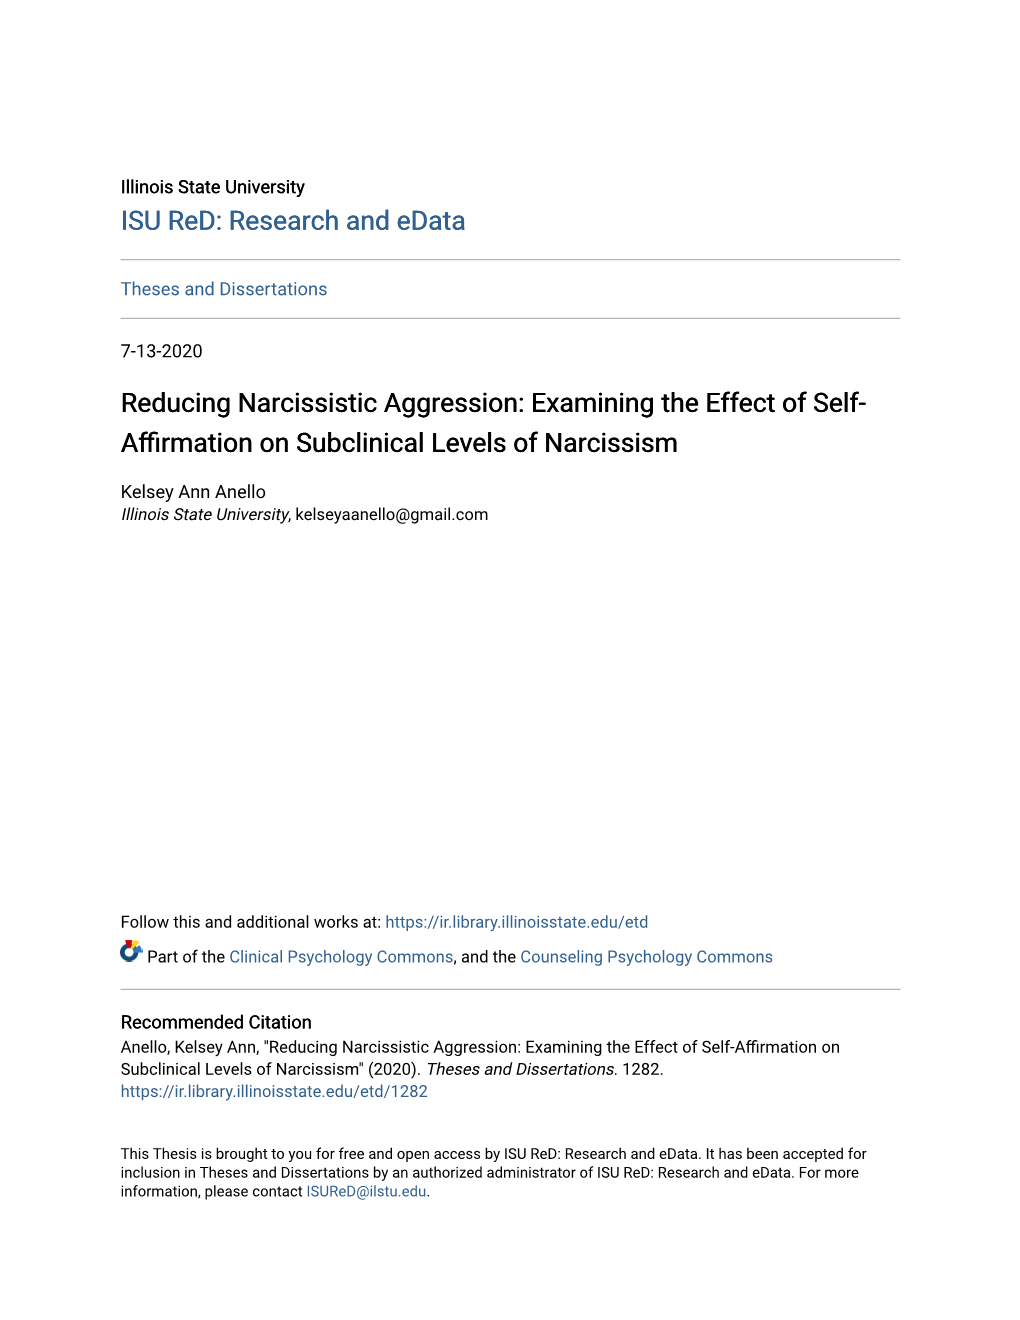 Reducing Narcissistic Aggression: Examining the Effect of Self- Affirmation on Subclinical Vle Els of Narcissism